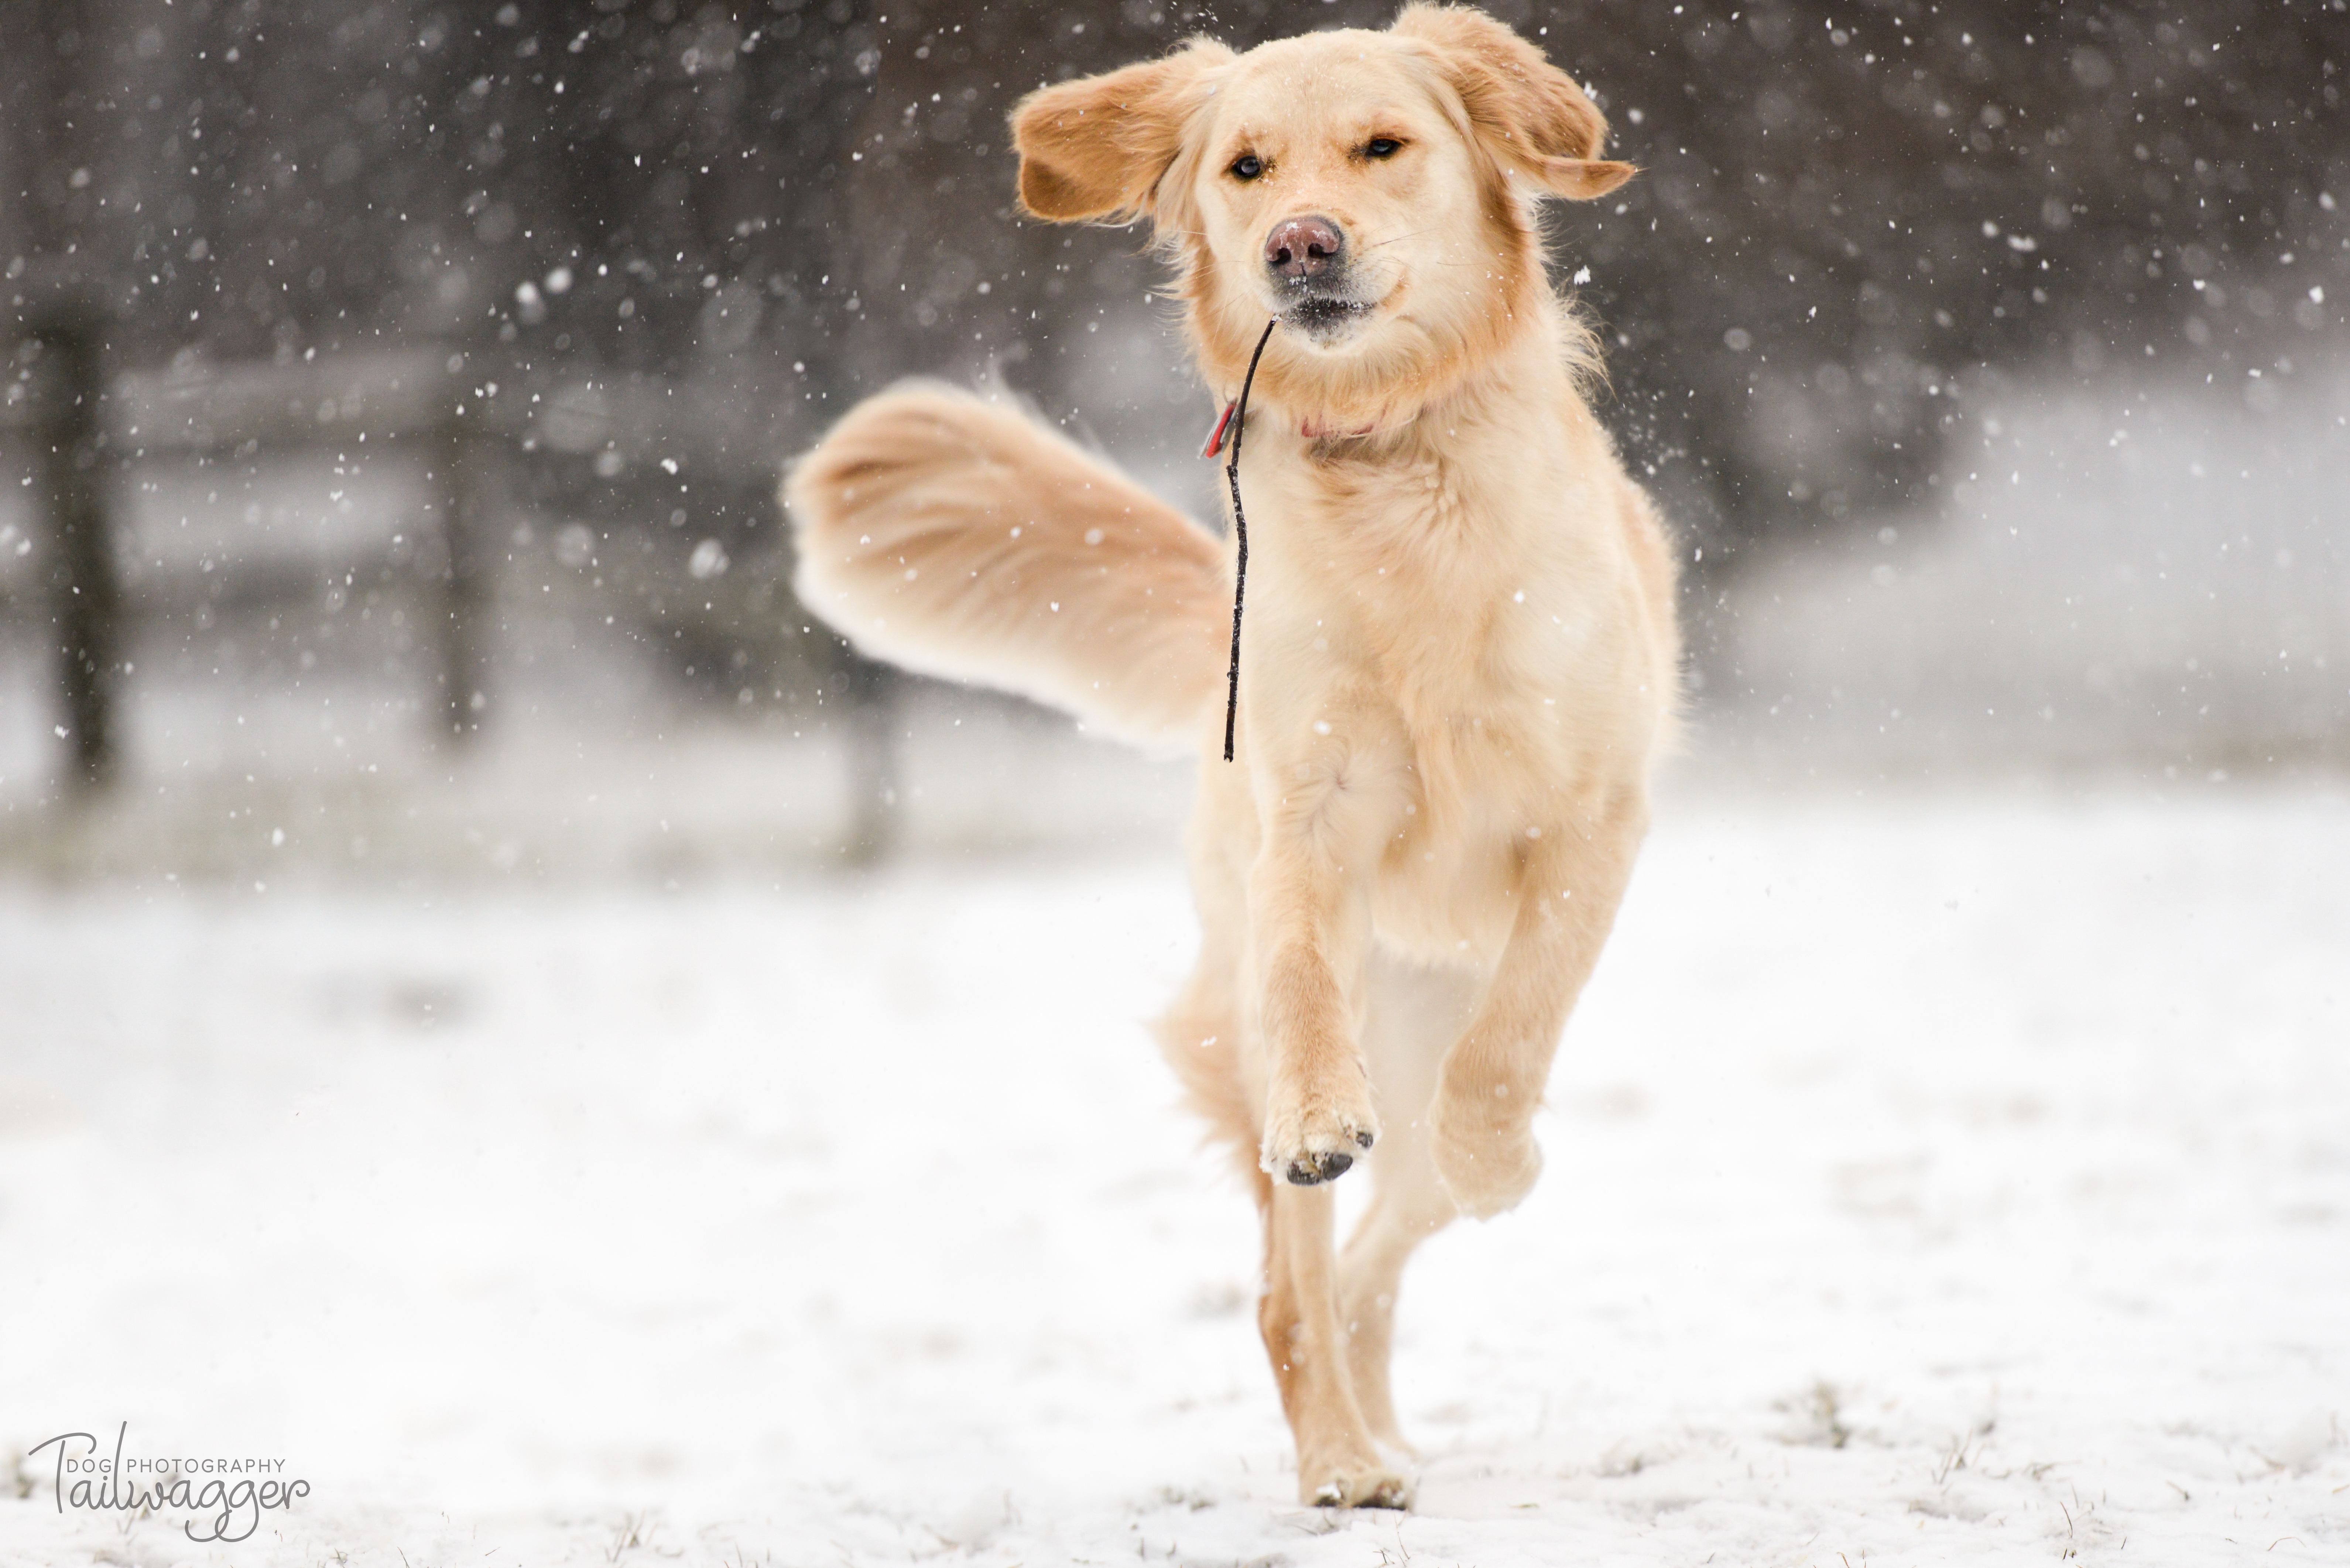 Golden Retriever running through the snow with a stick in her mouth.